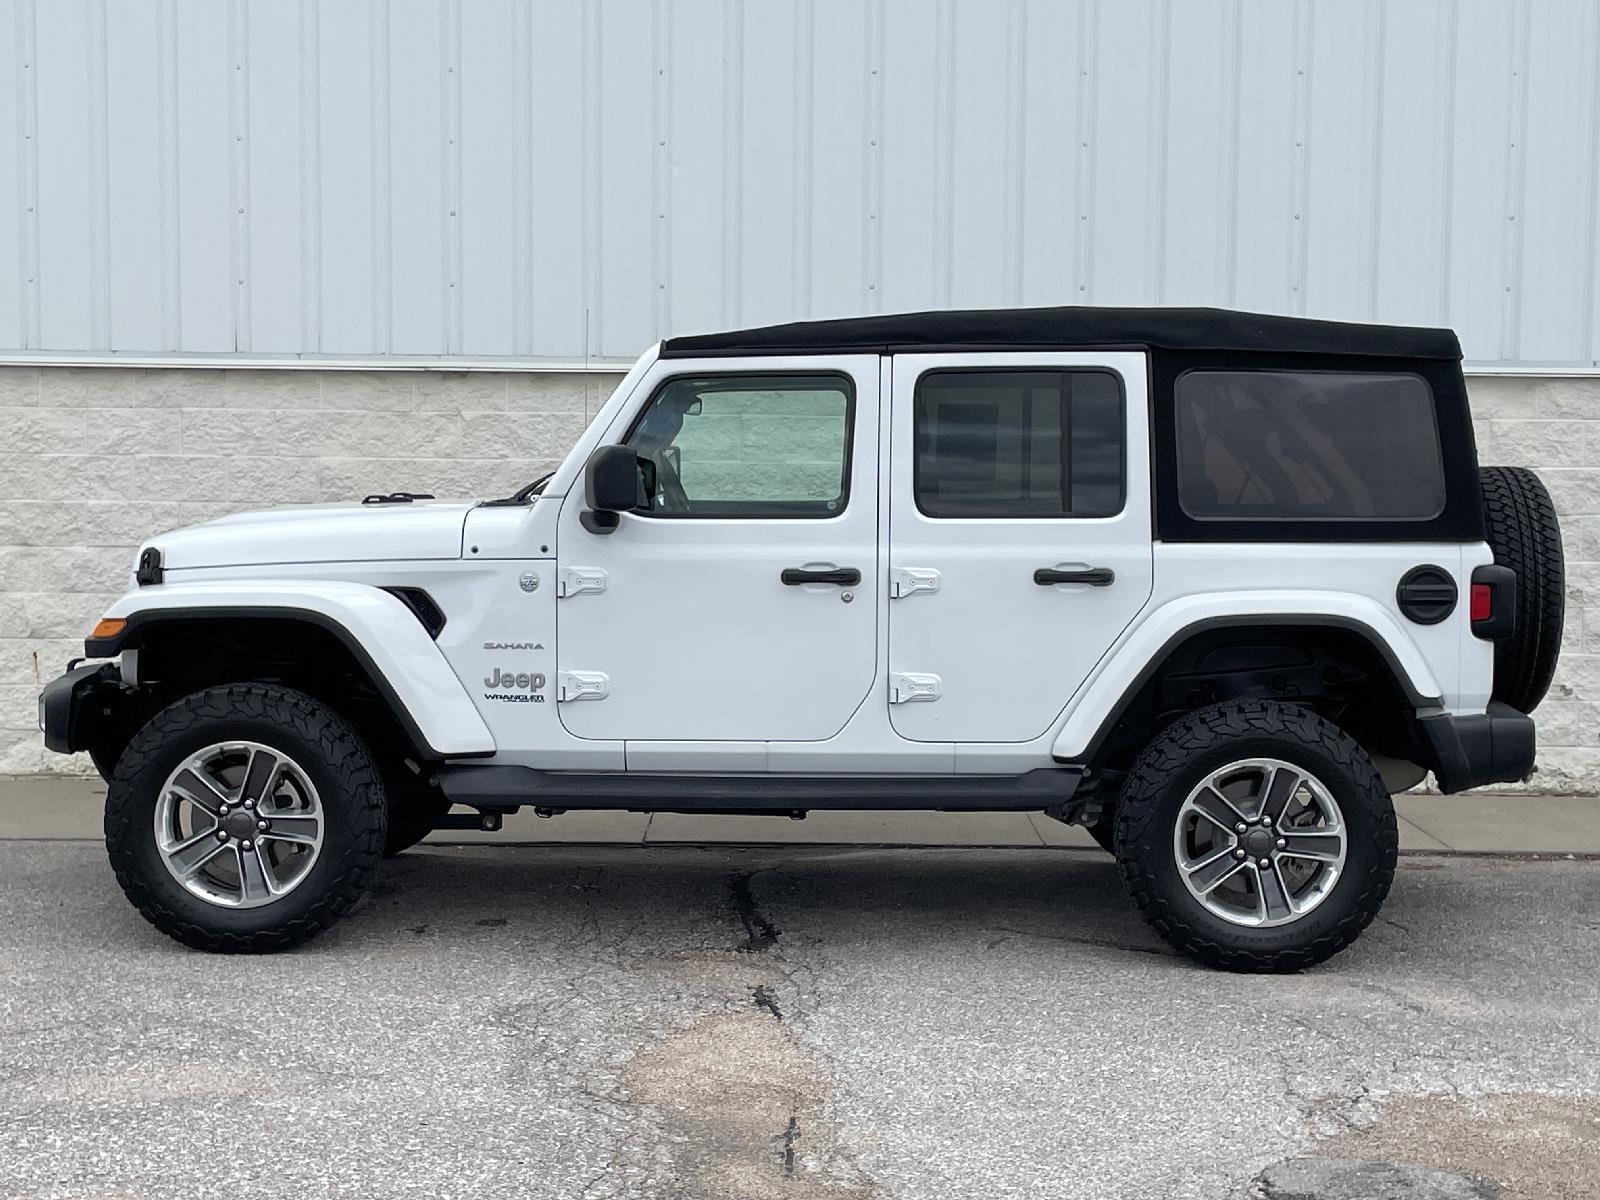 Used 2018 Jeep Wrangler Unlimited Sahara SUV for sale in Lincoln NE